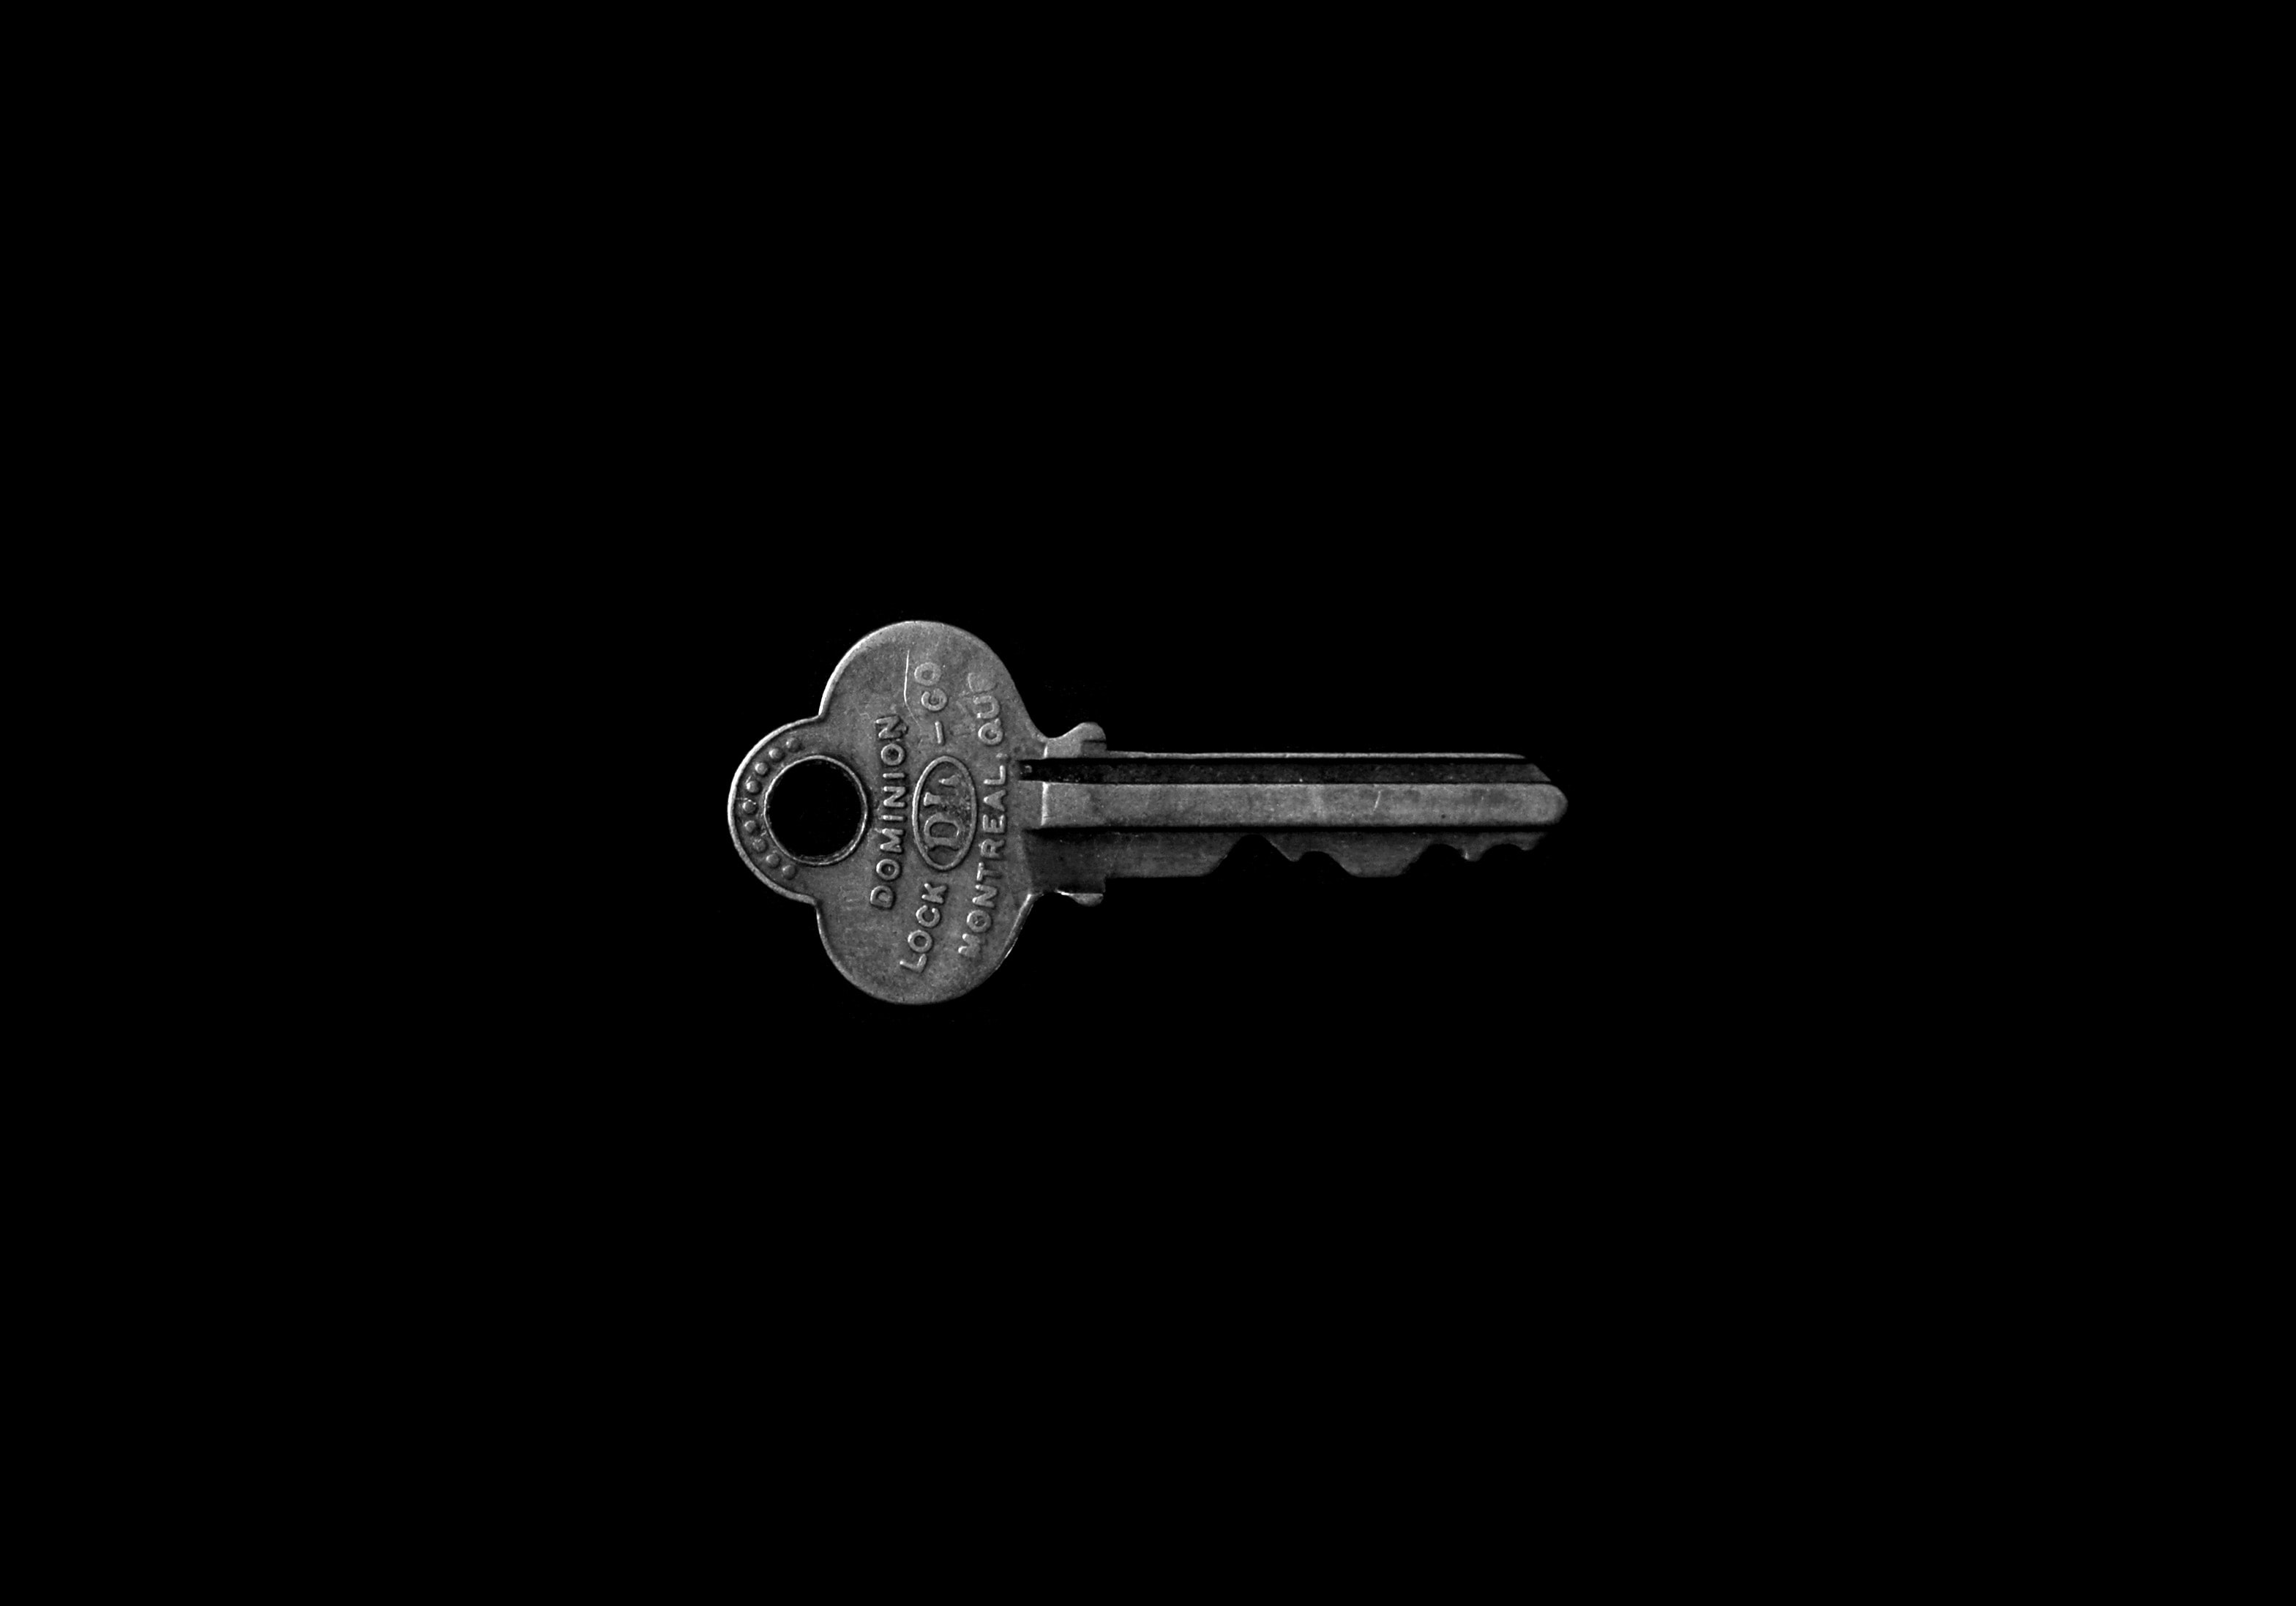 A picture of a chrome plated key